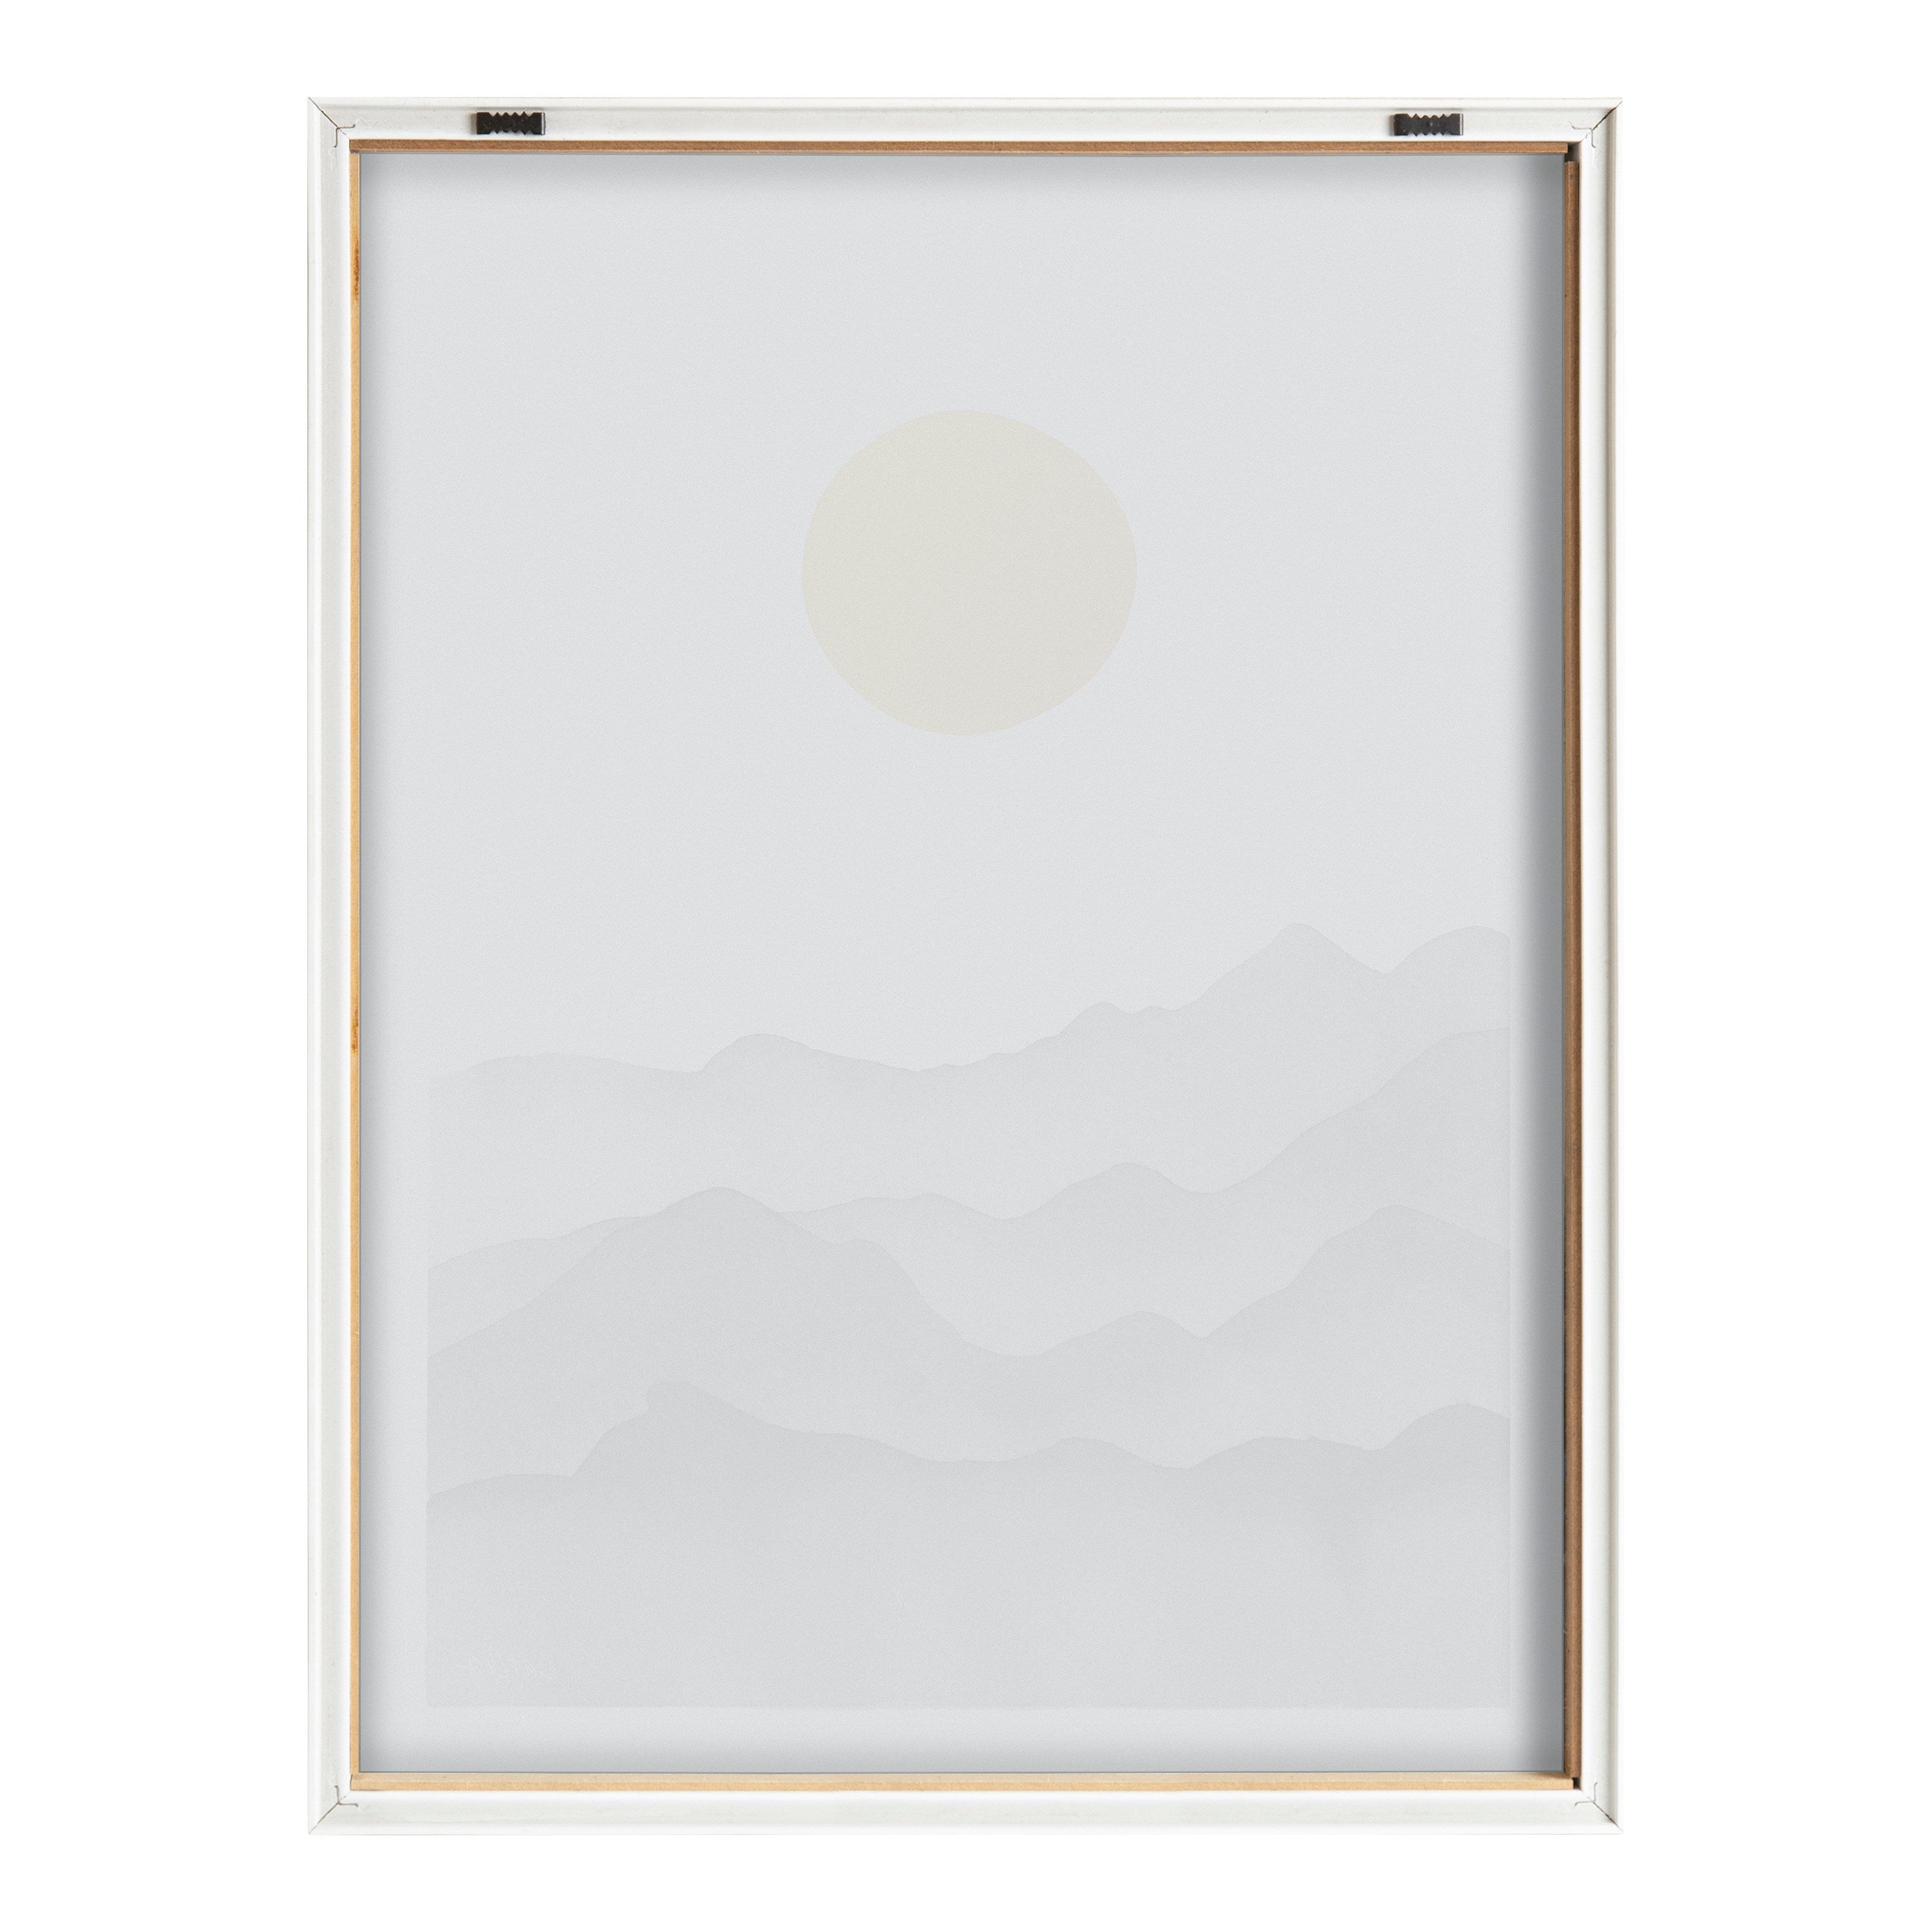 Blake Black Yellow Mountain Range Silhouette Framed Printed Glass by Cat Coquillette